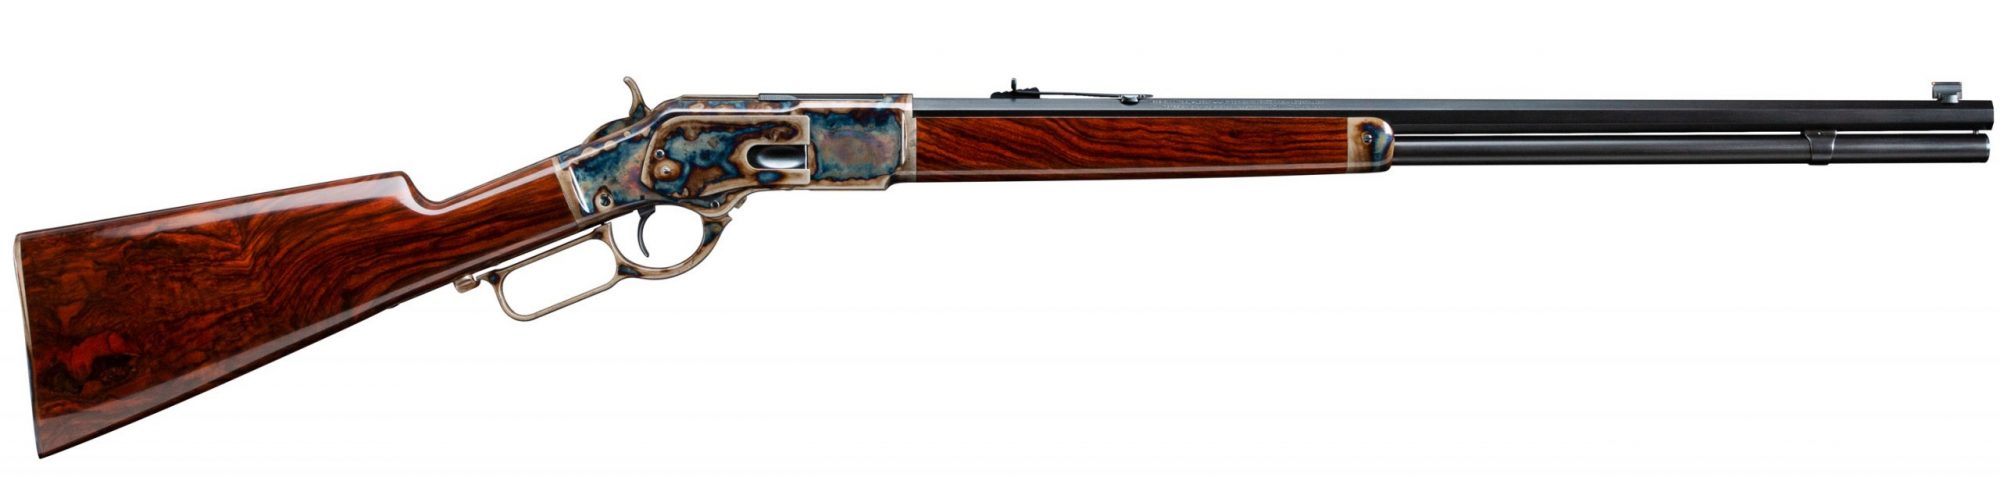 Color case hardened Turnbull Winchester 1873 with exhibition grade English walnut stocks